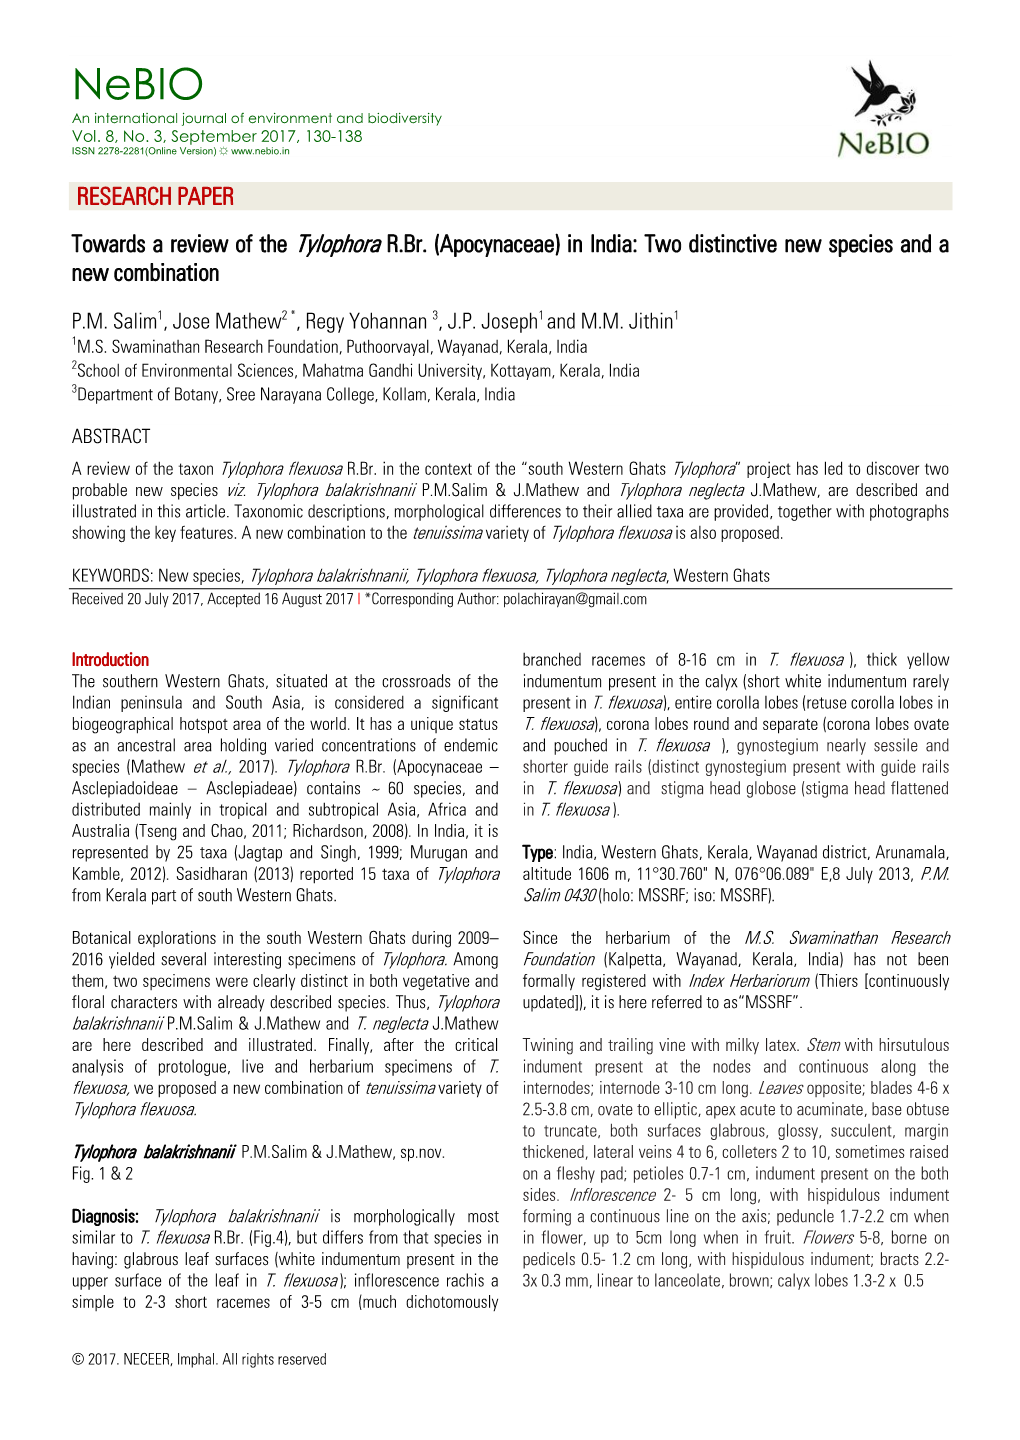 RESEARCH PAPER Towards a Review of the Tylophora R.Br